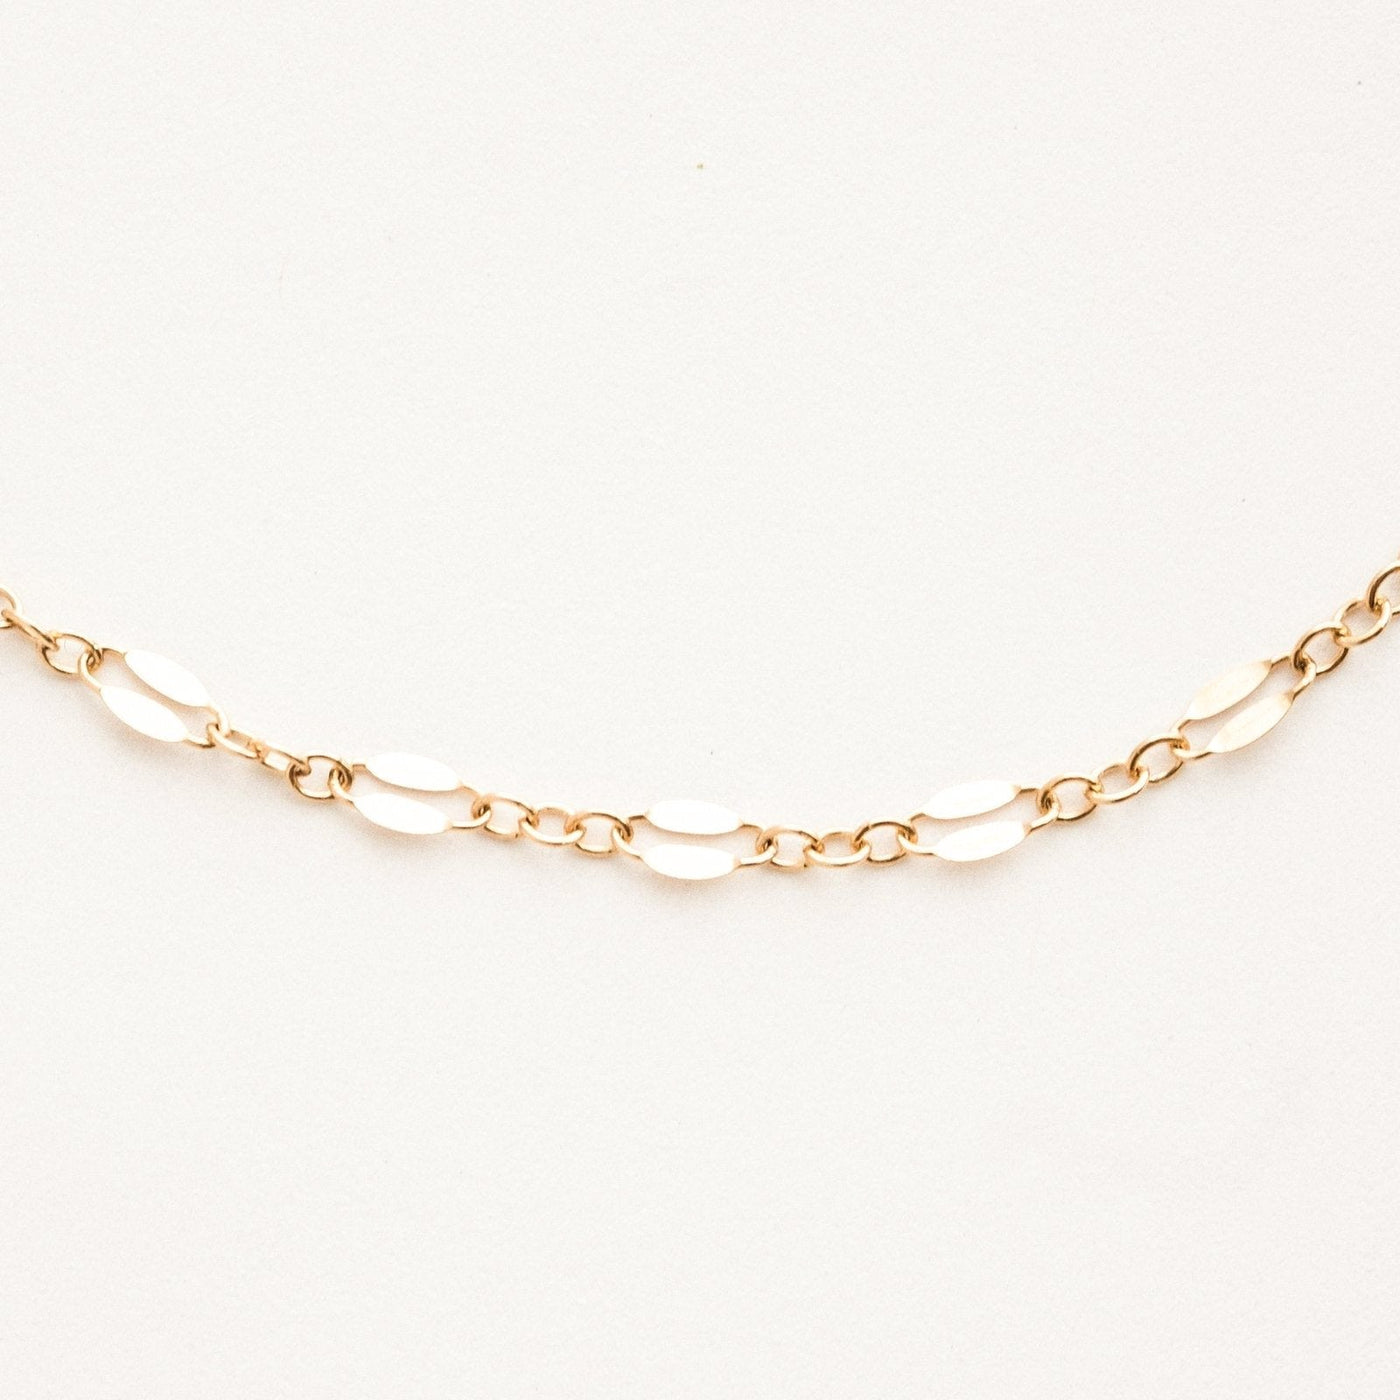 Lace Chain Anklet by Simple & Dainty Jewelry